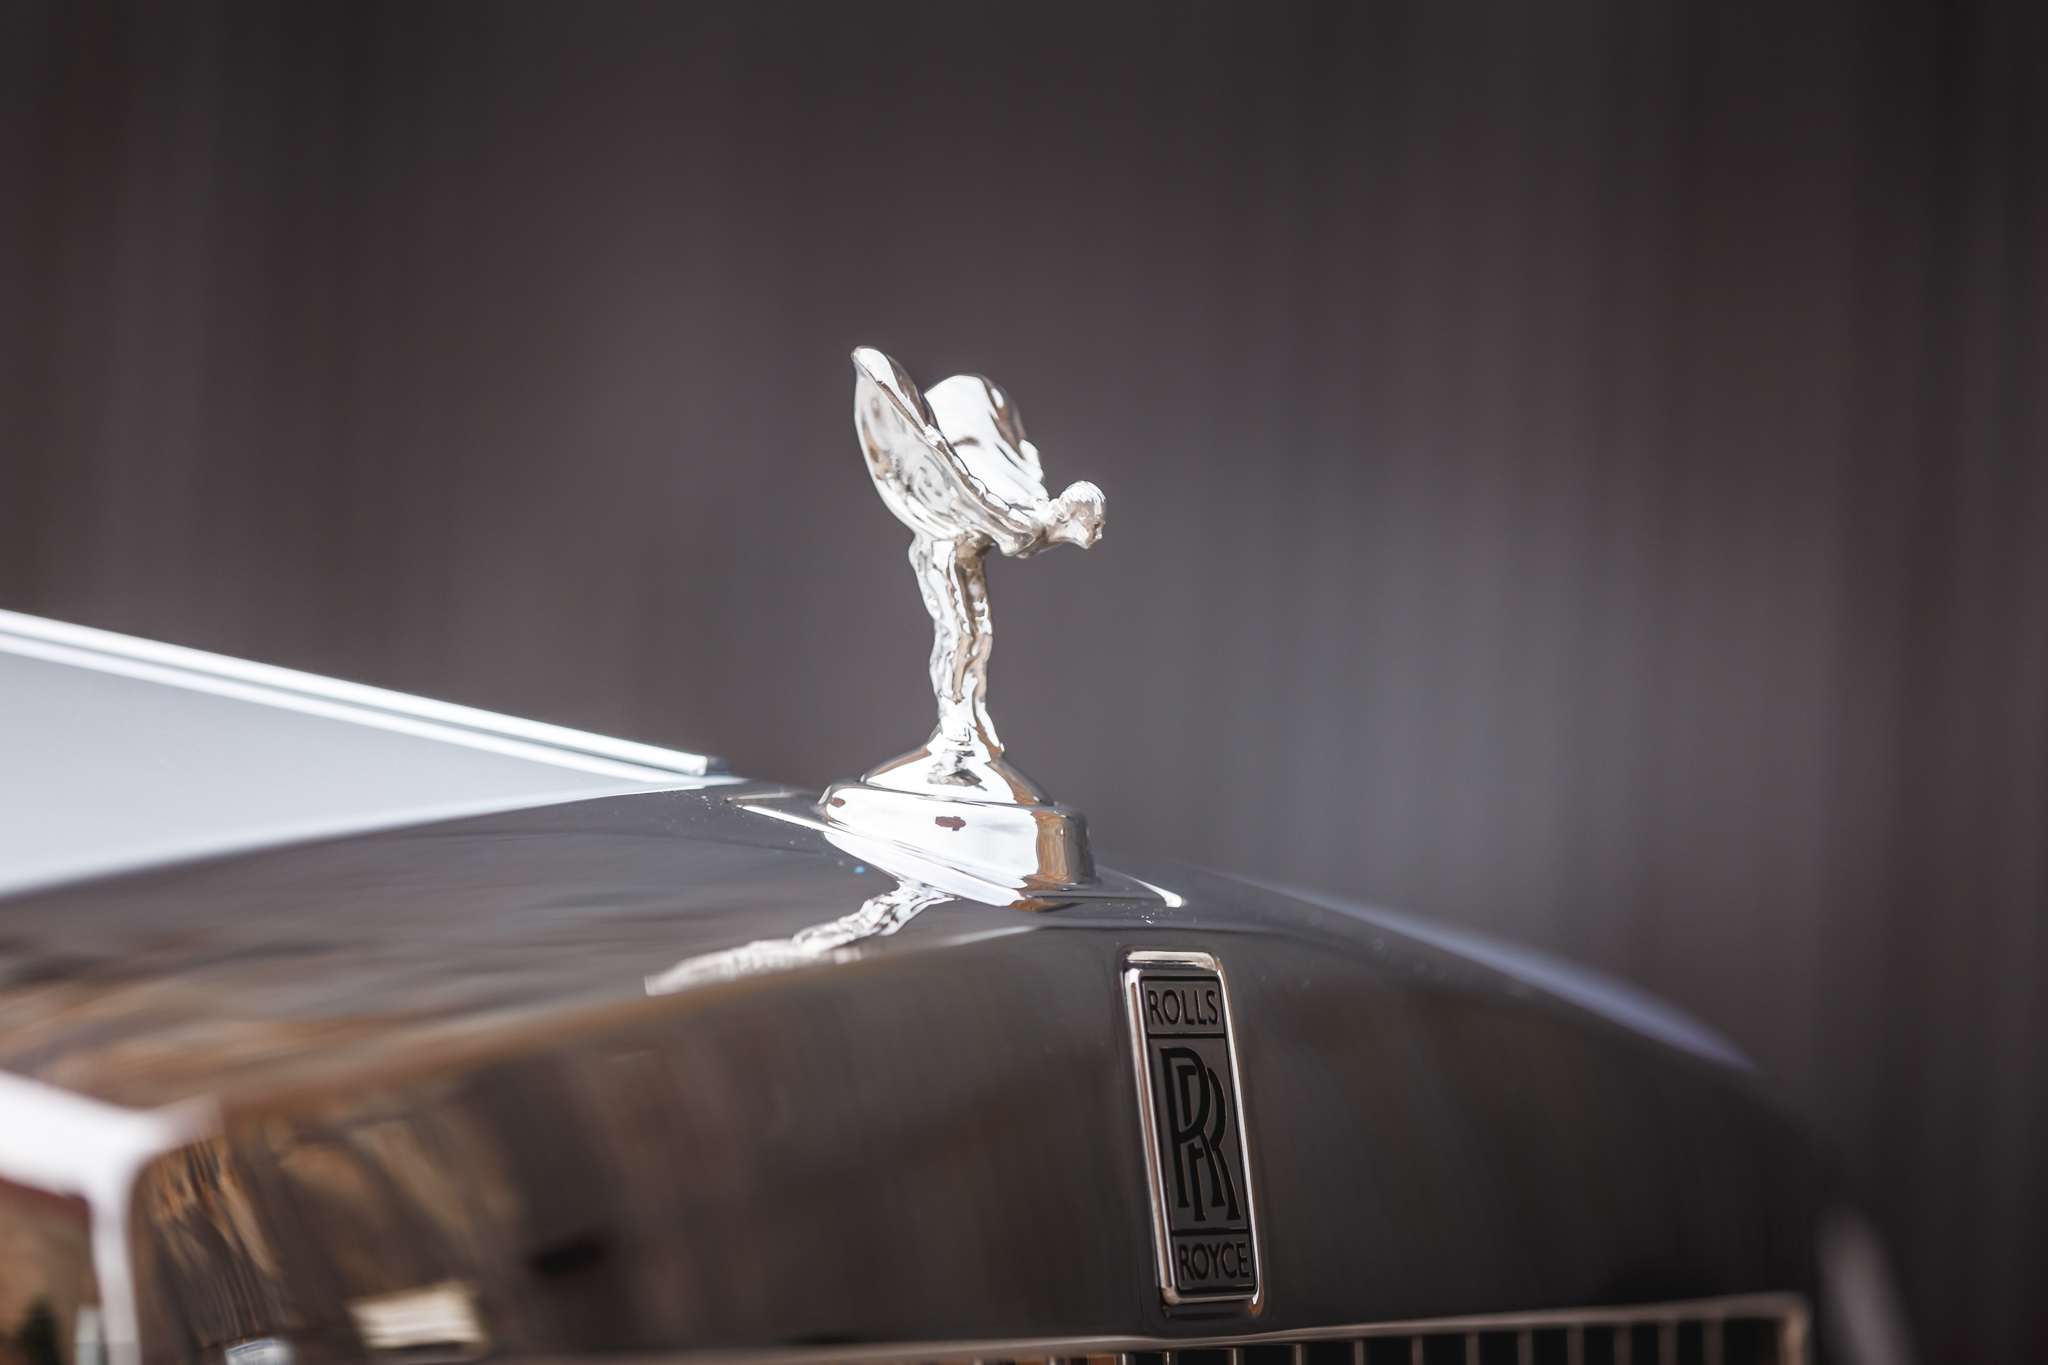 2018 Signals Best Ever Year For Rolls-Royce